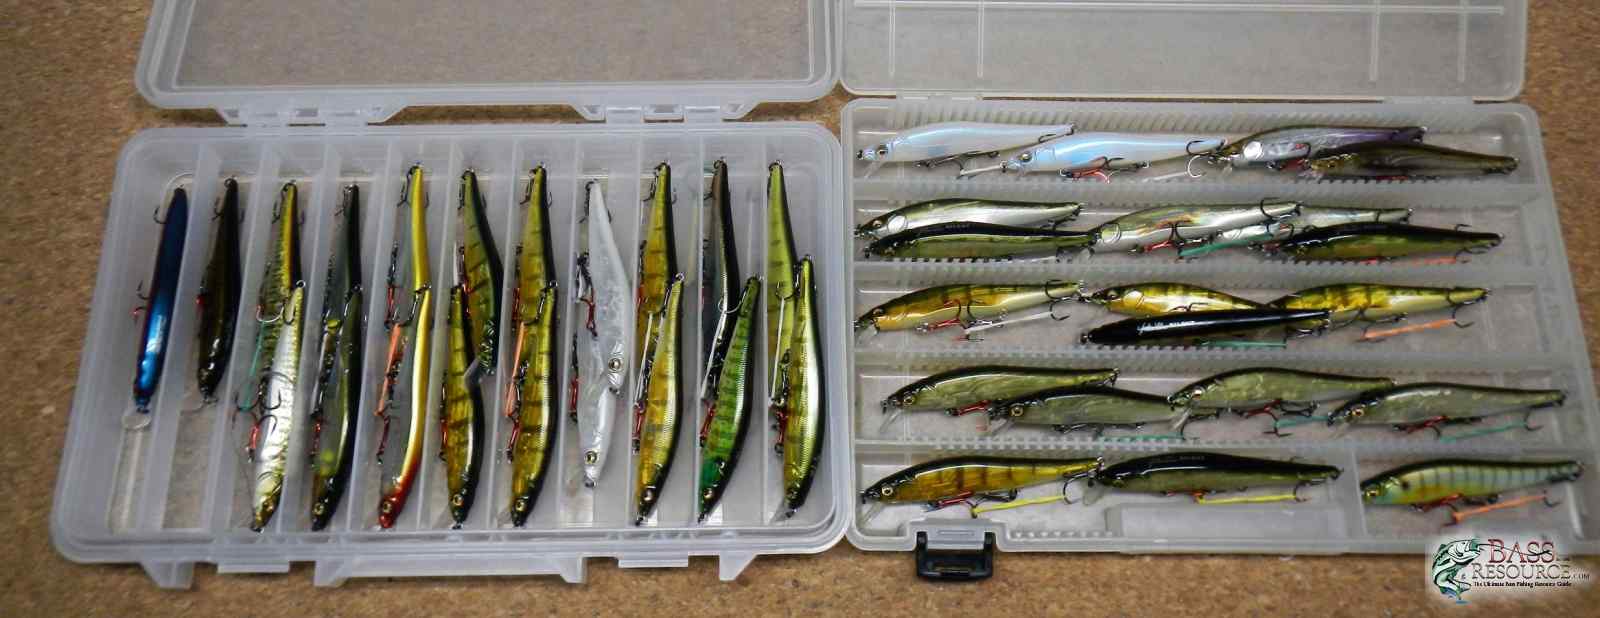 Trouble With Perch Colored Baits - Fishing Tackle - Bass Fishing Forums